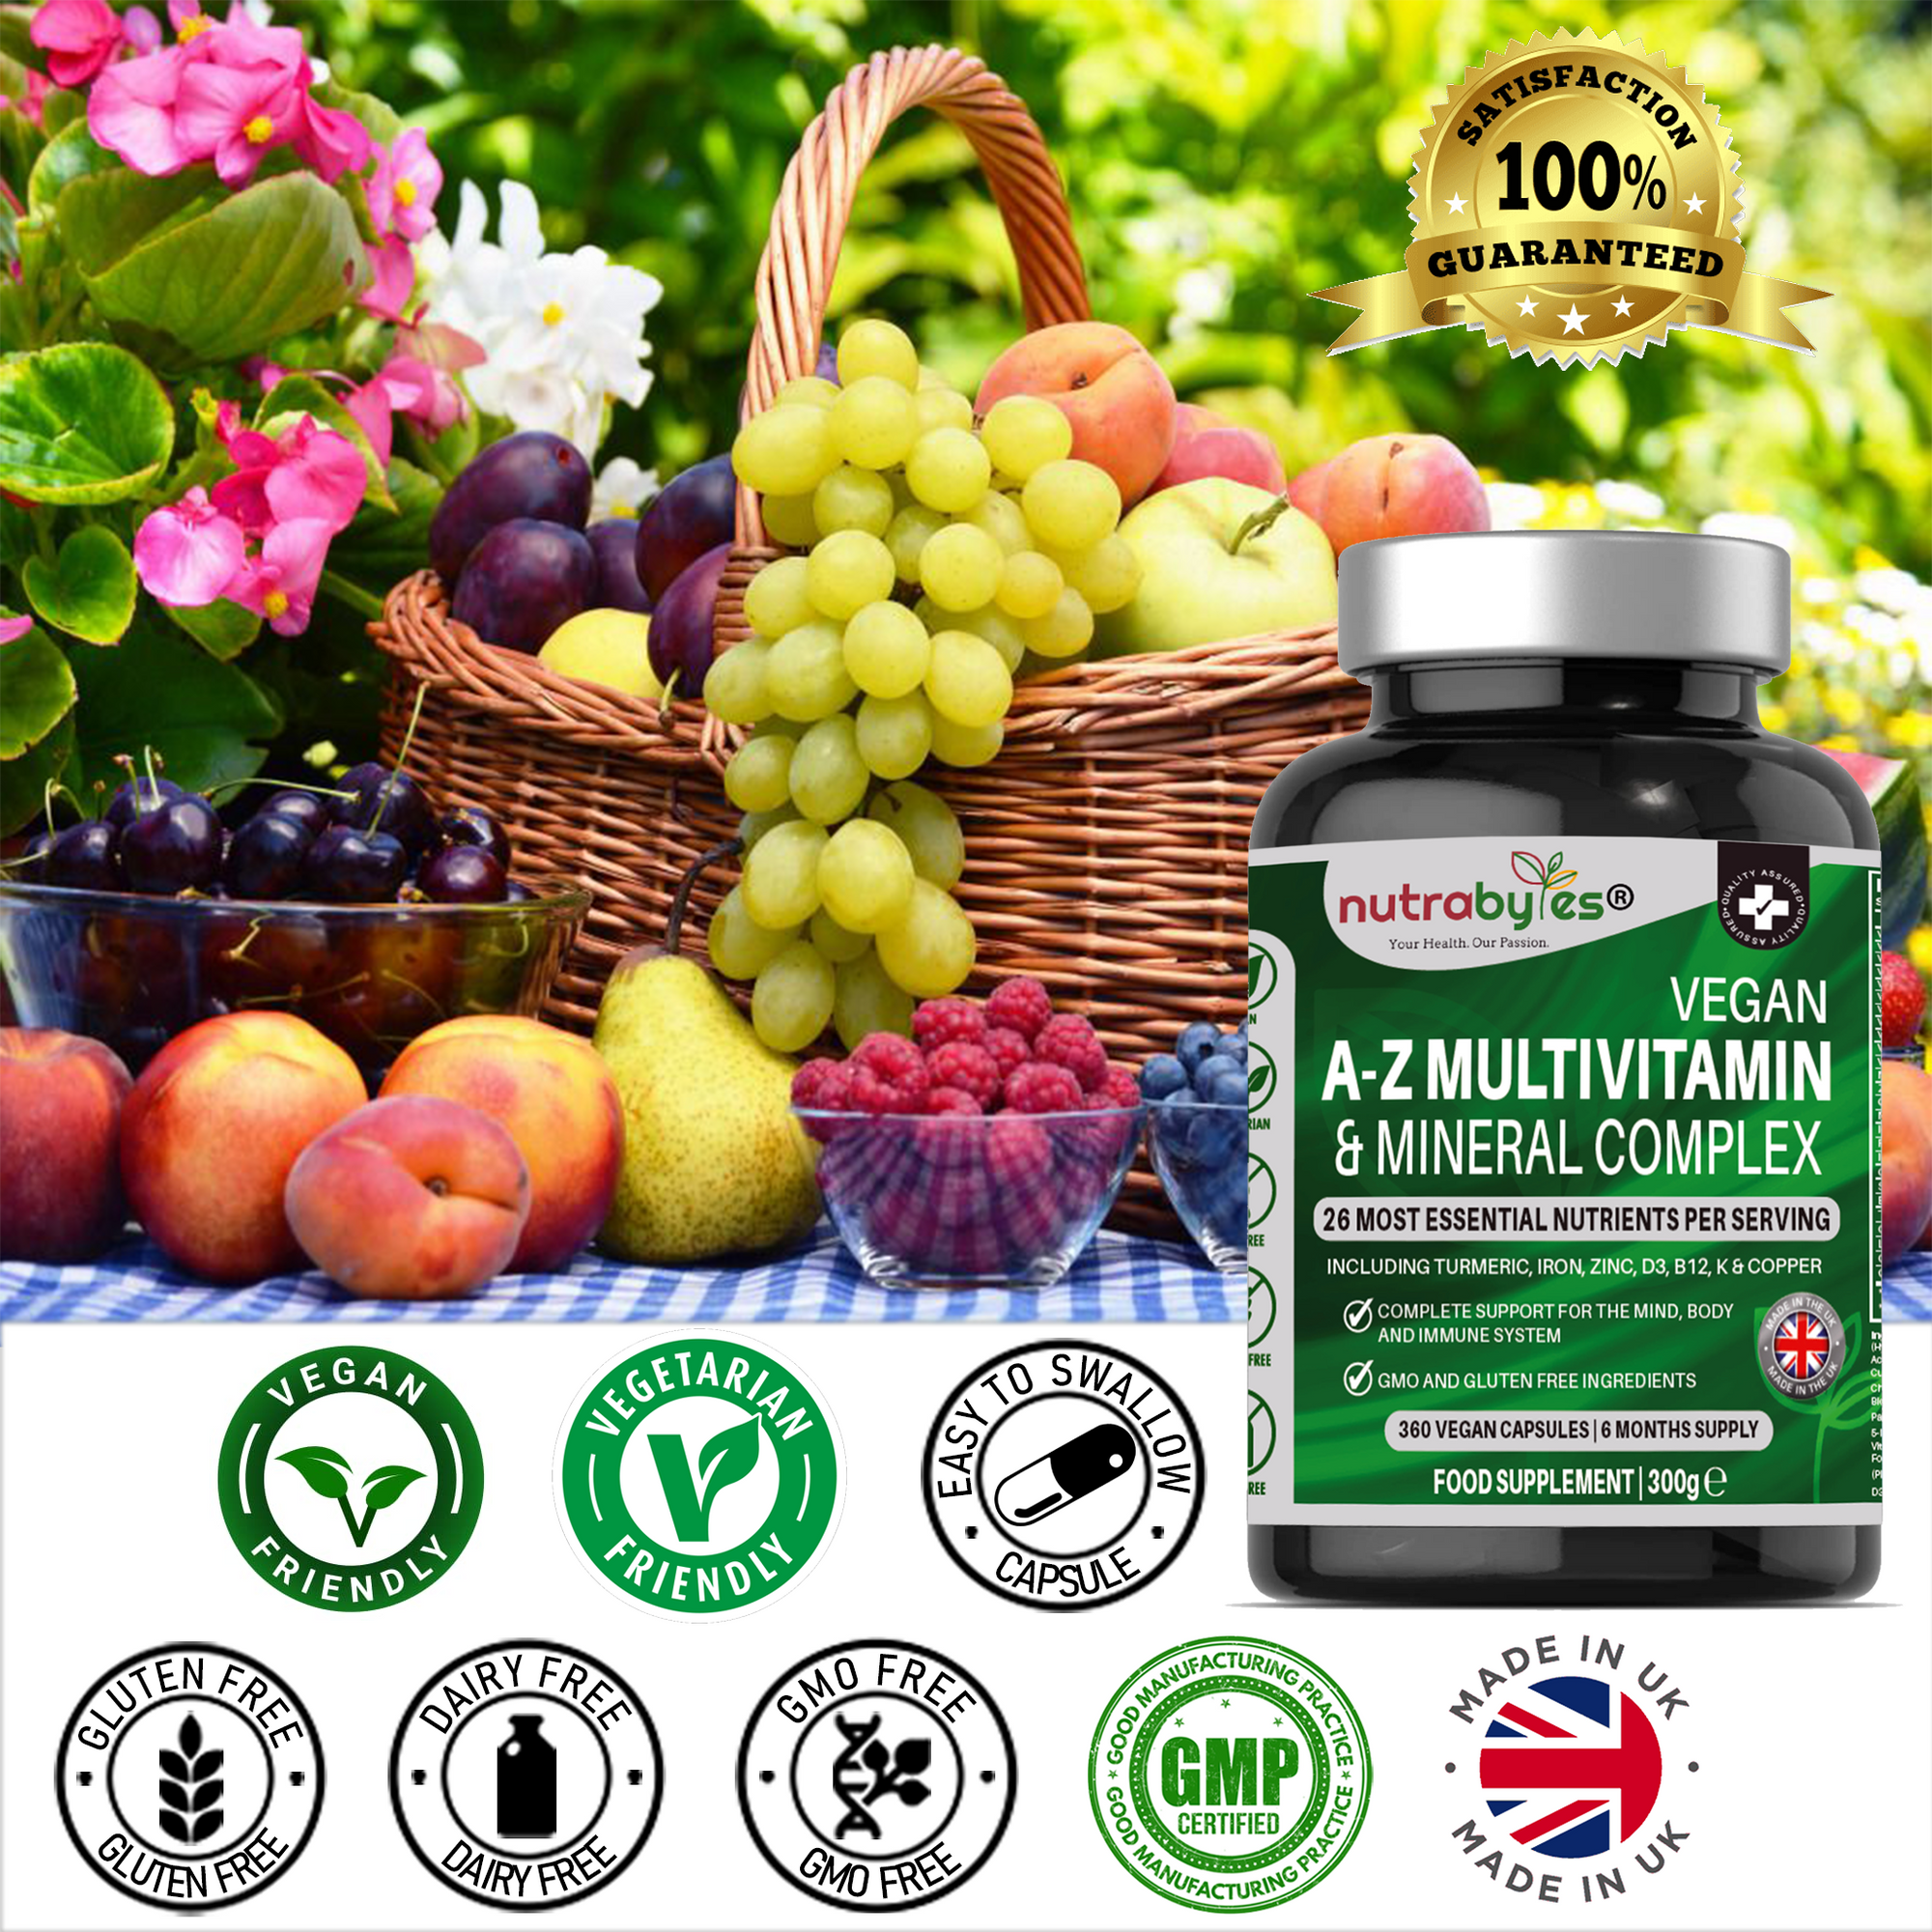 How to choose the best Vegan Multivitamins and Minerals for yourself?